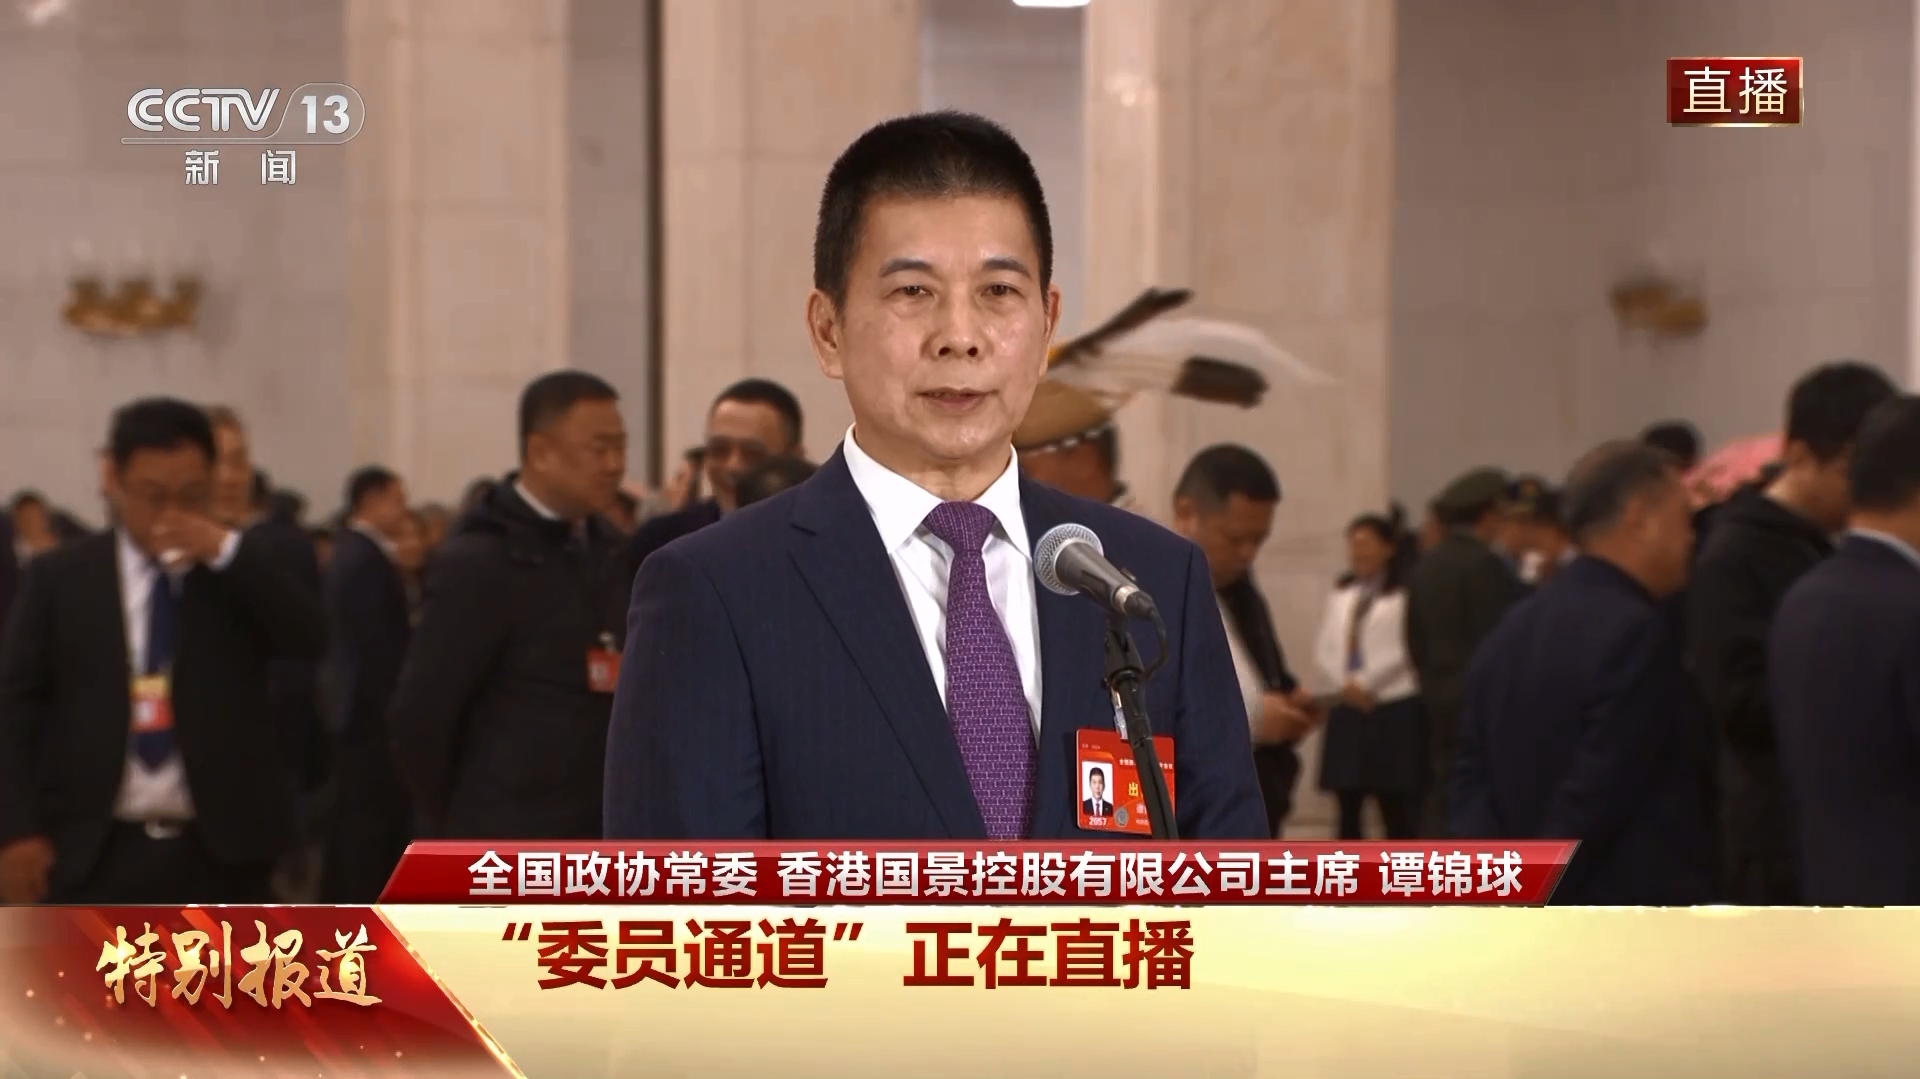 Tam Kam-kau, a member of the 14th CPPCC National Committee takes questions from reporters. /A screenshot from China Media Group